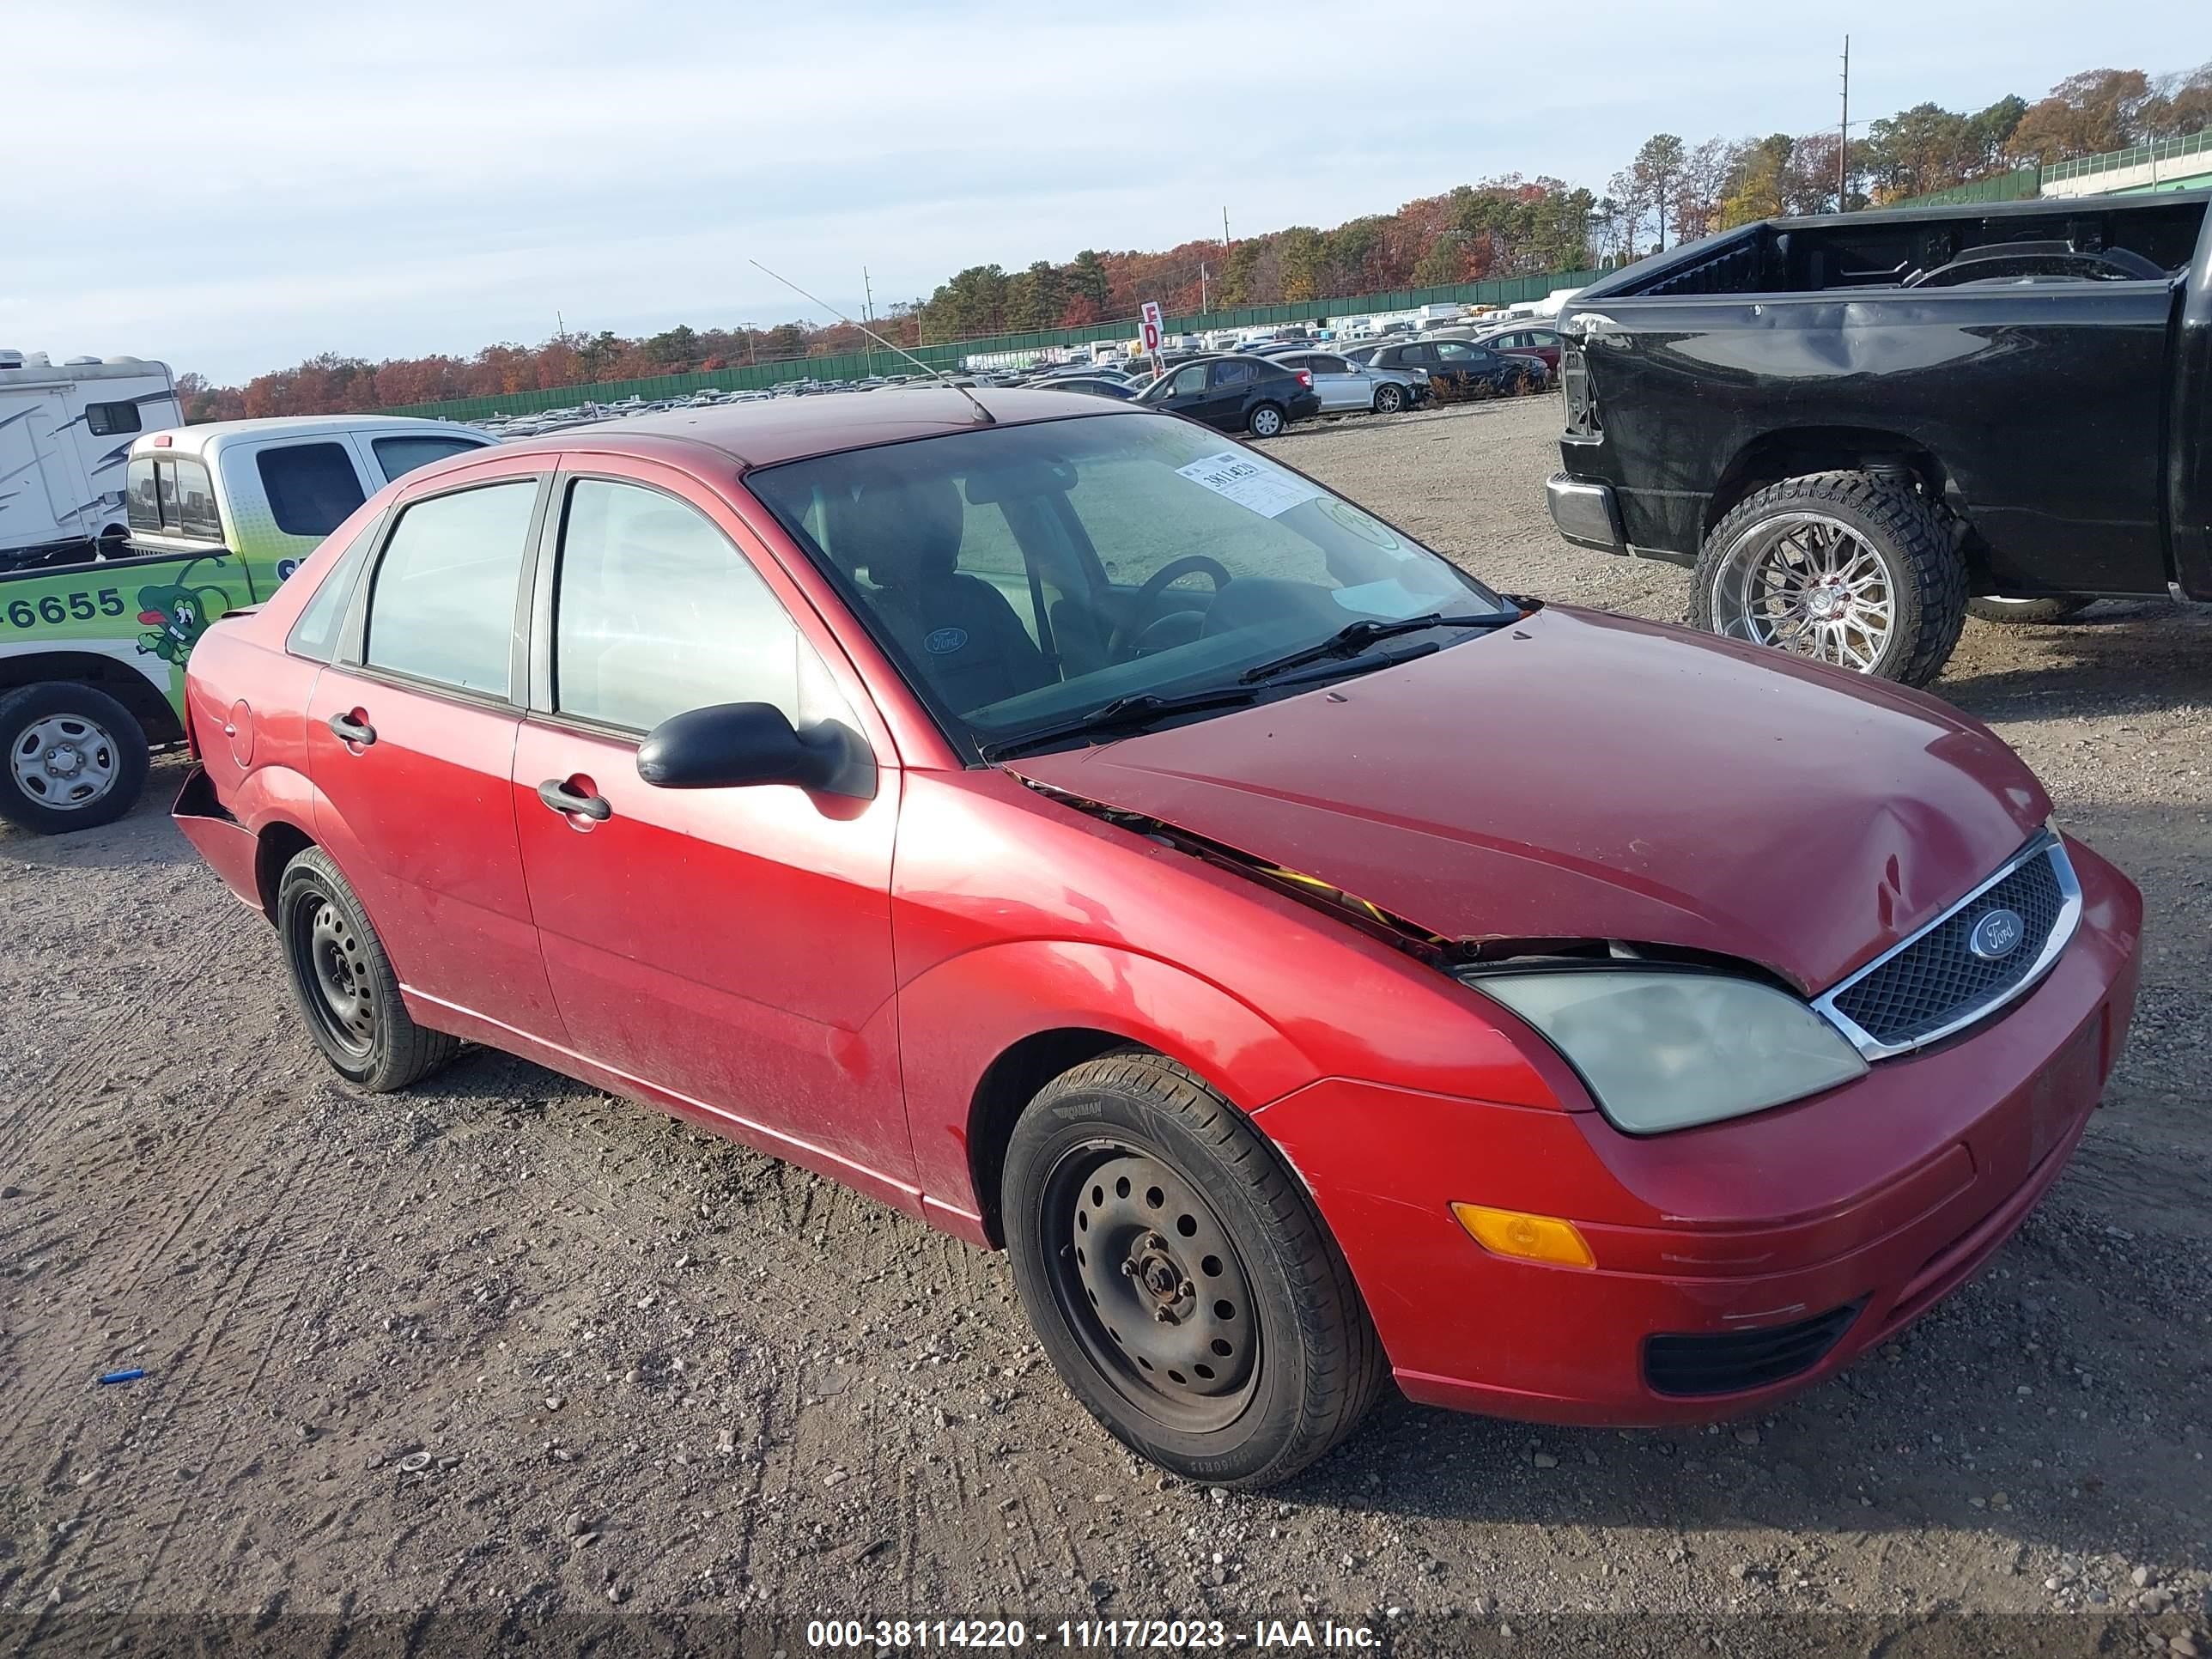 vin: 1FAFP34N95W284543 1FAFP34N95W284543 2005 ford focus 2000 for Sale in 11763, 21 Peconic Ave, Medford, USA